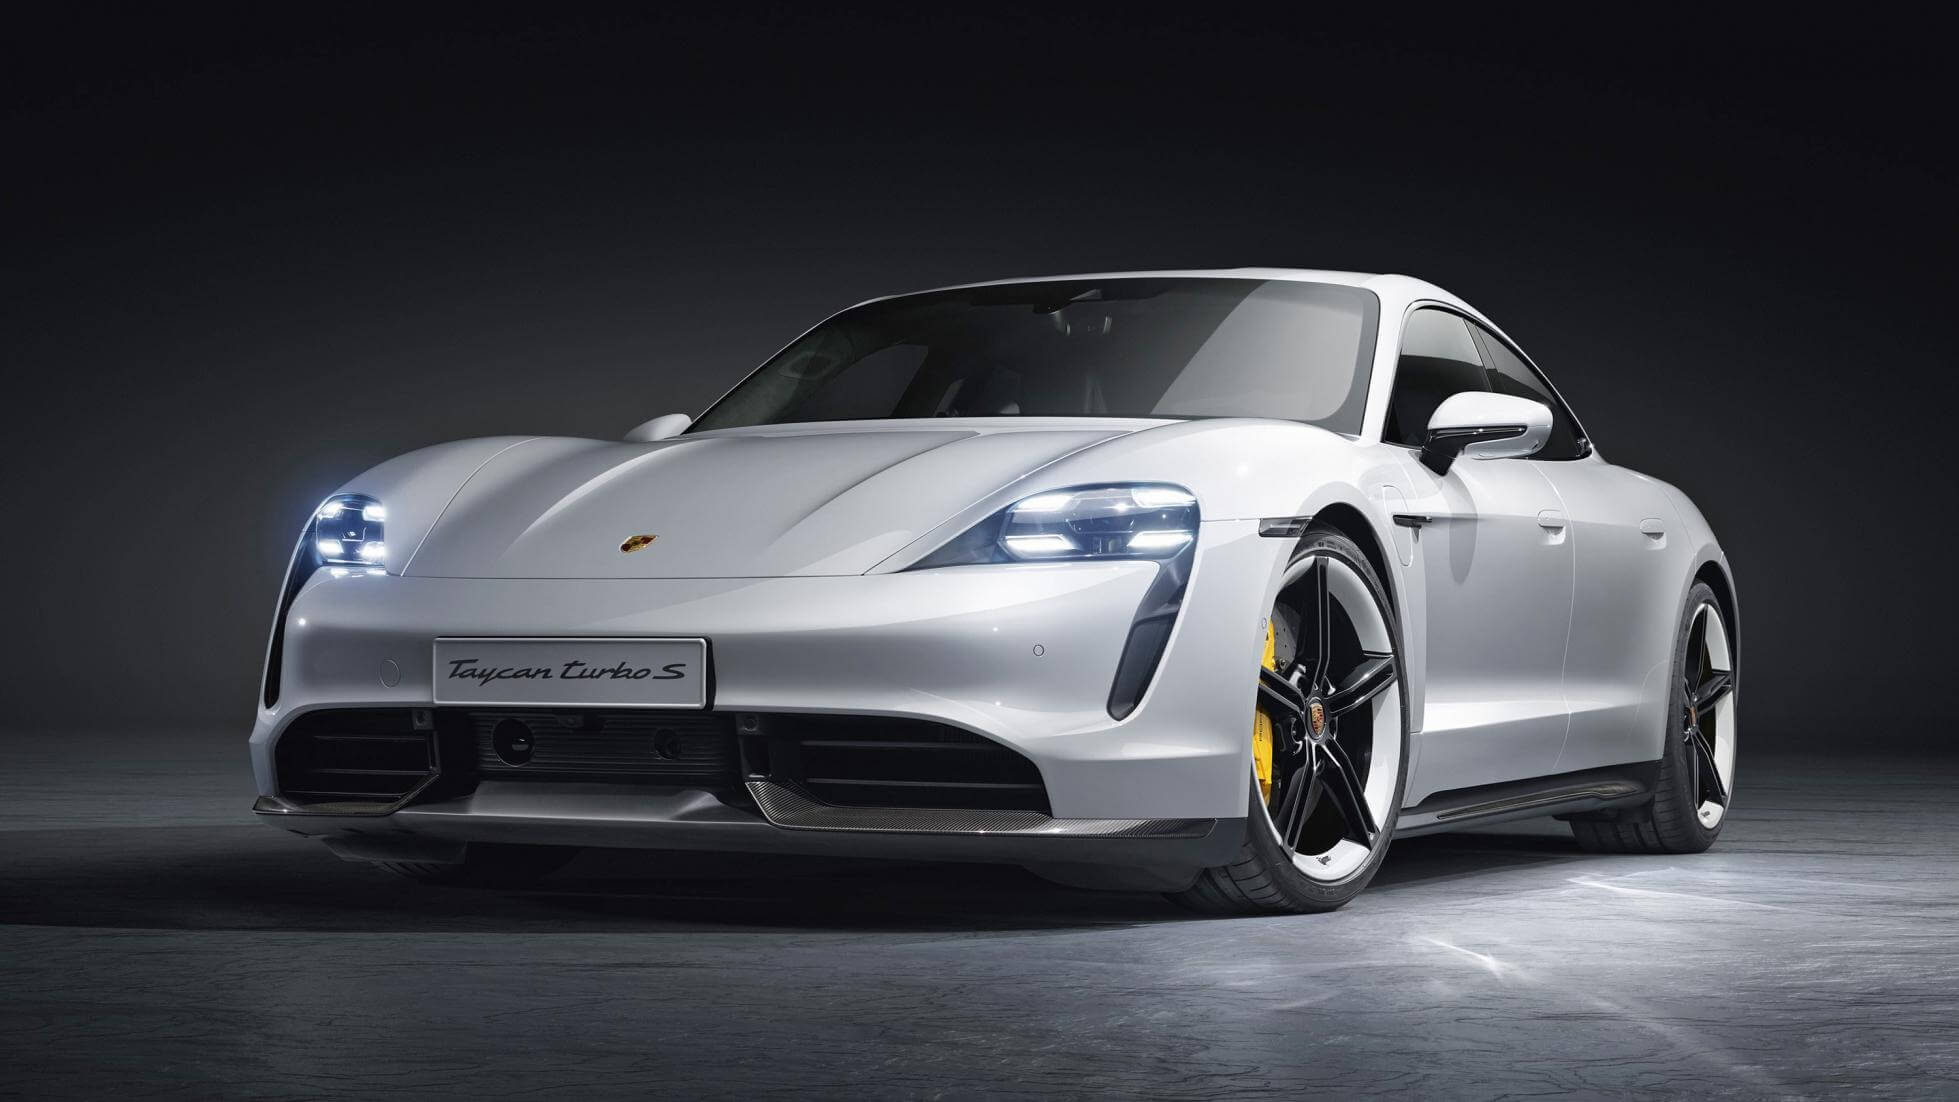 Porsche finally unveils its all-electric Taycan sports car